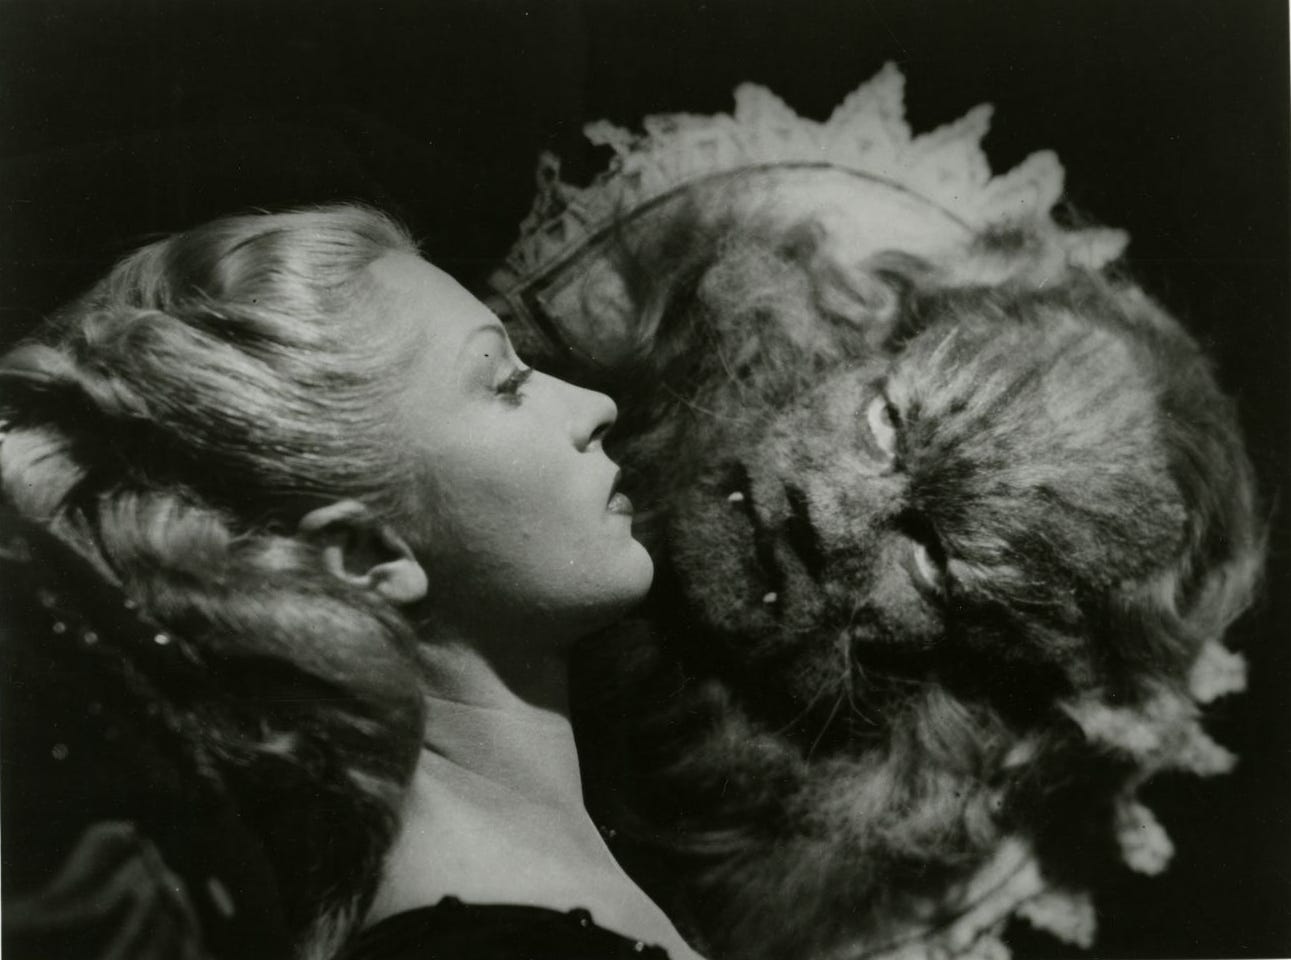 Black and white phorograph showing a blonde-haired woman in profile, facing a hairy beast in the shape of a man